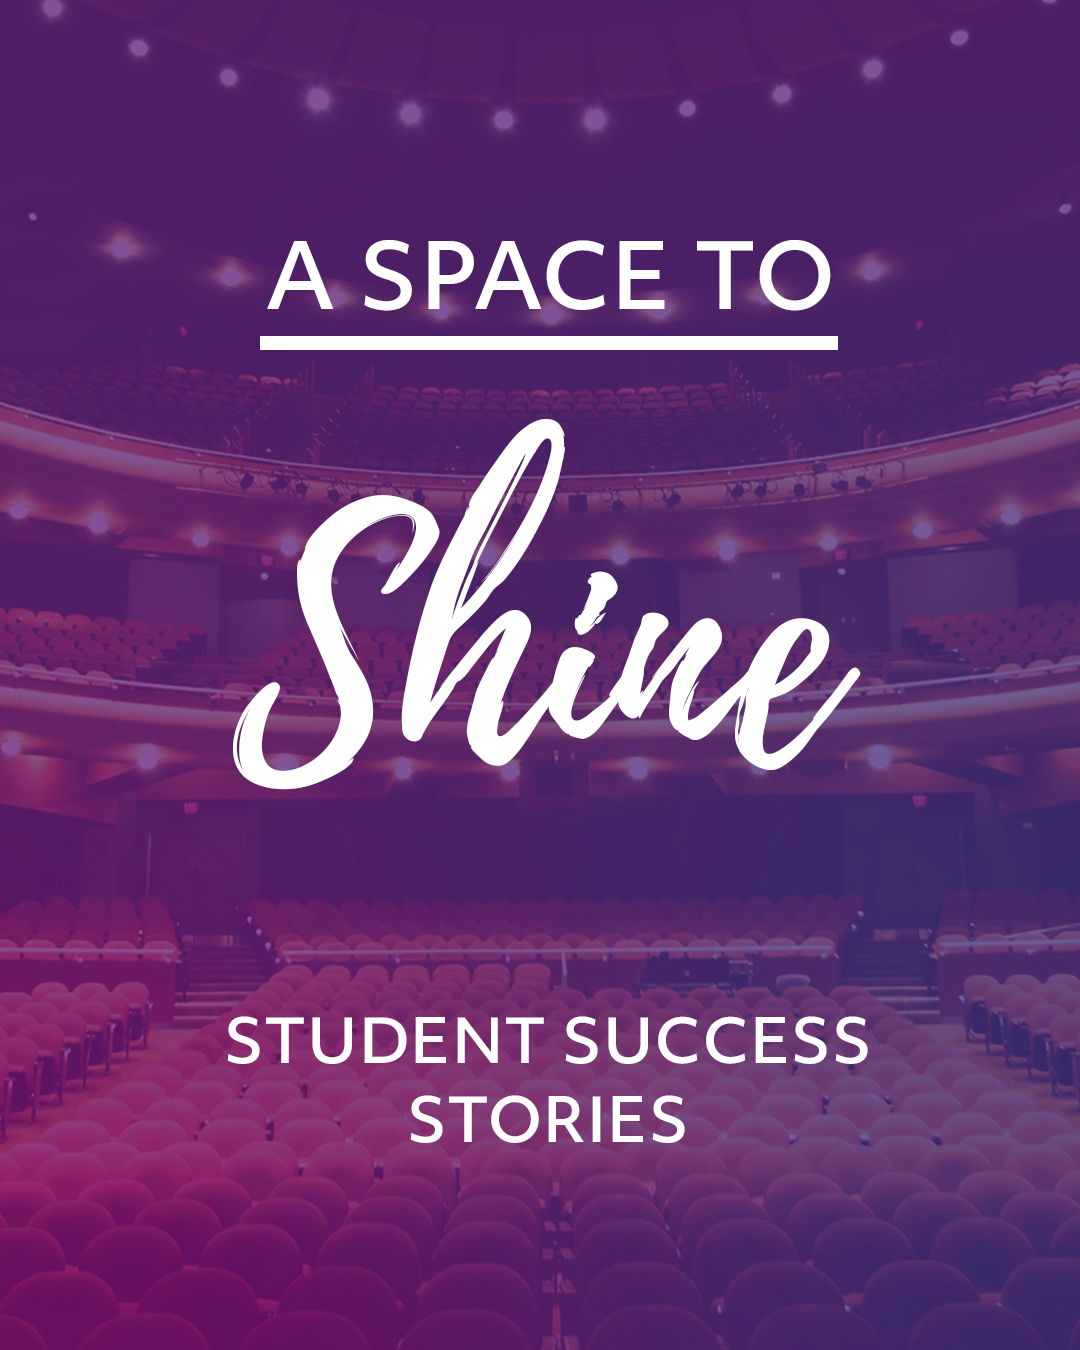 A Space to Shine - Student Success Stories